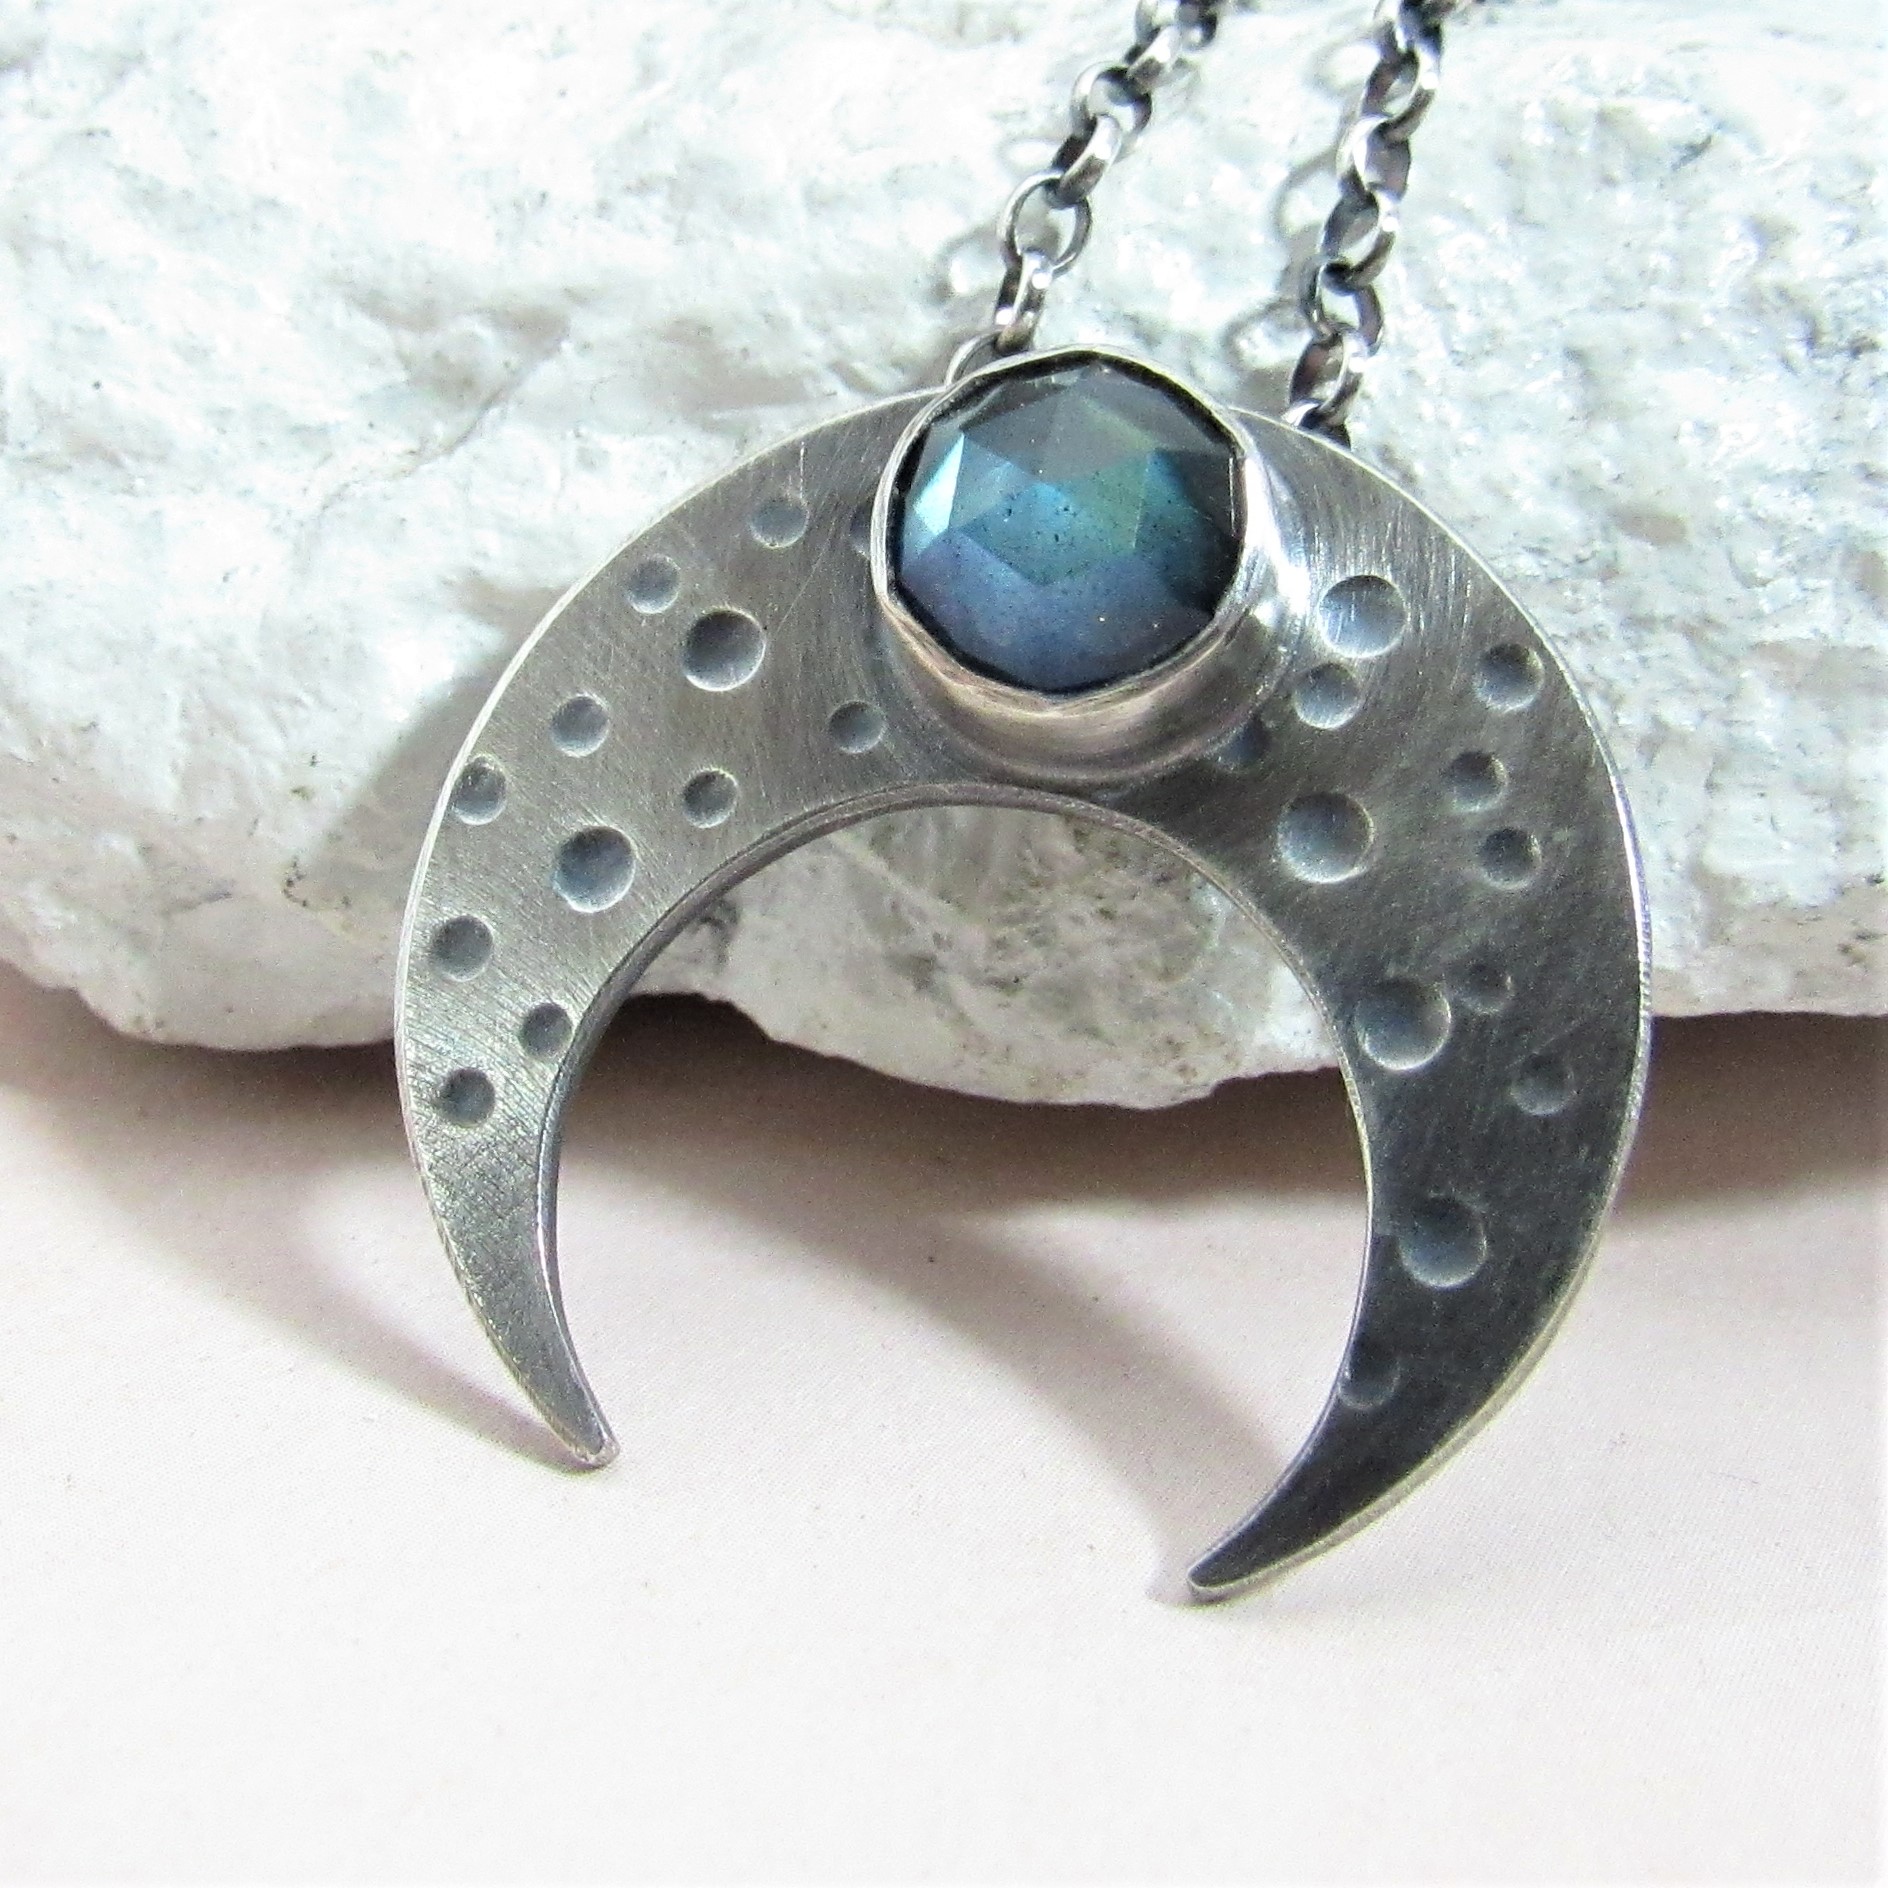 Upside down sterling crescent moon pendant with faceted labradorite